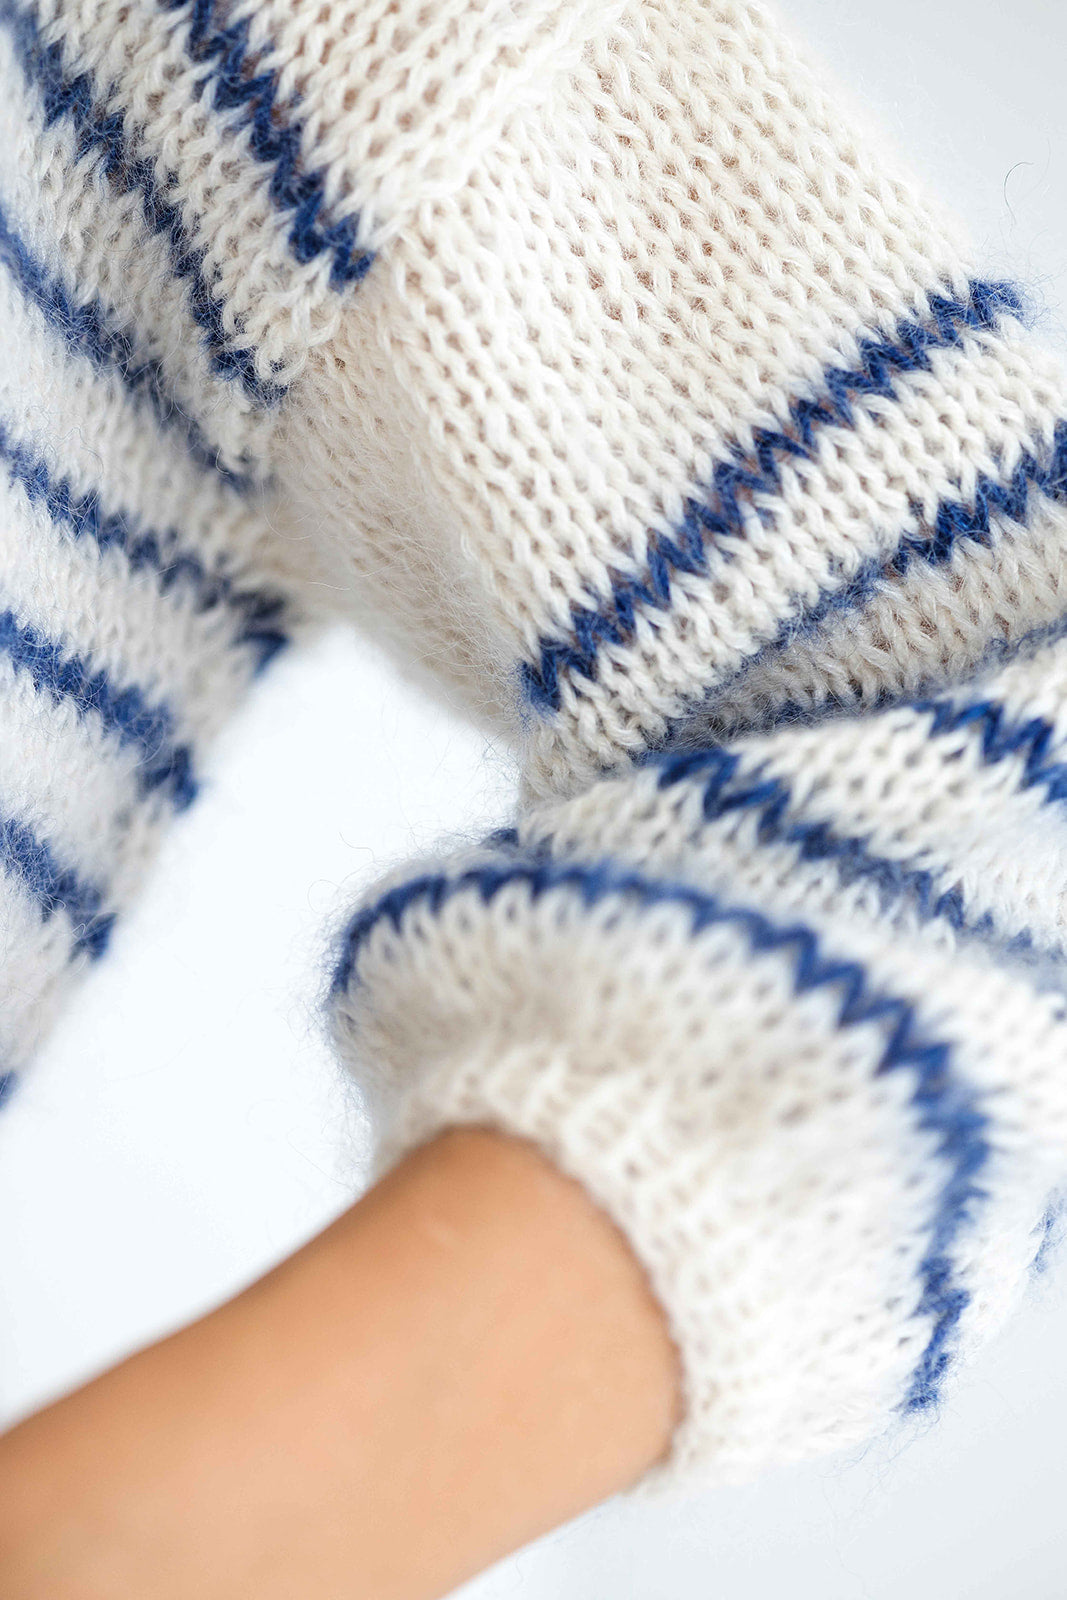 Striped white and blue mohair sweater, cable knit alpaca wool blend woman jumper, hand knitted slightly oversized pullover, fluffy mohair